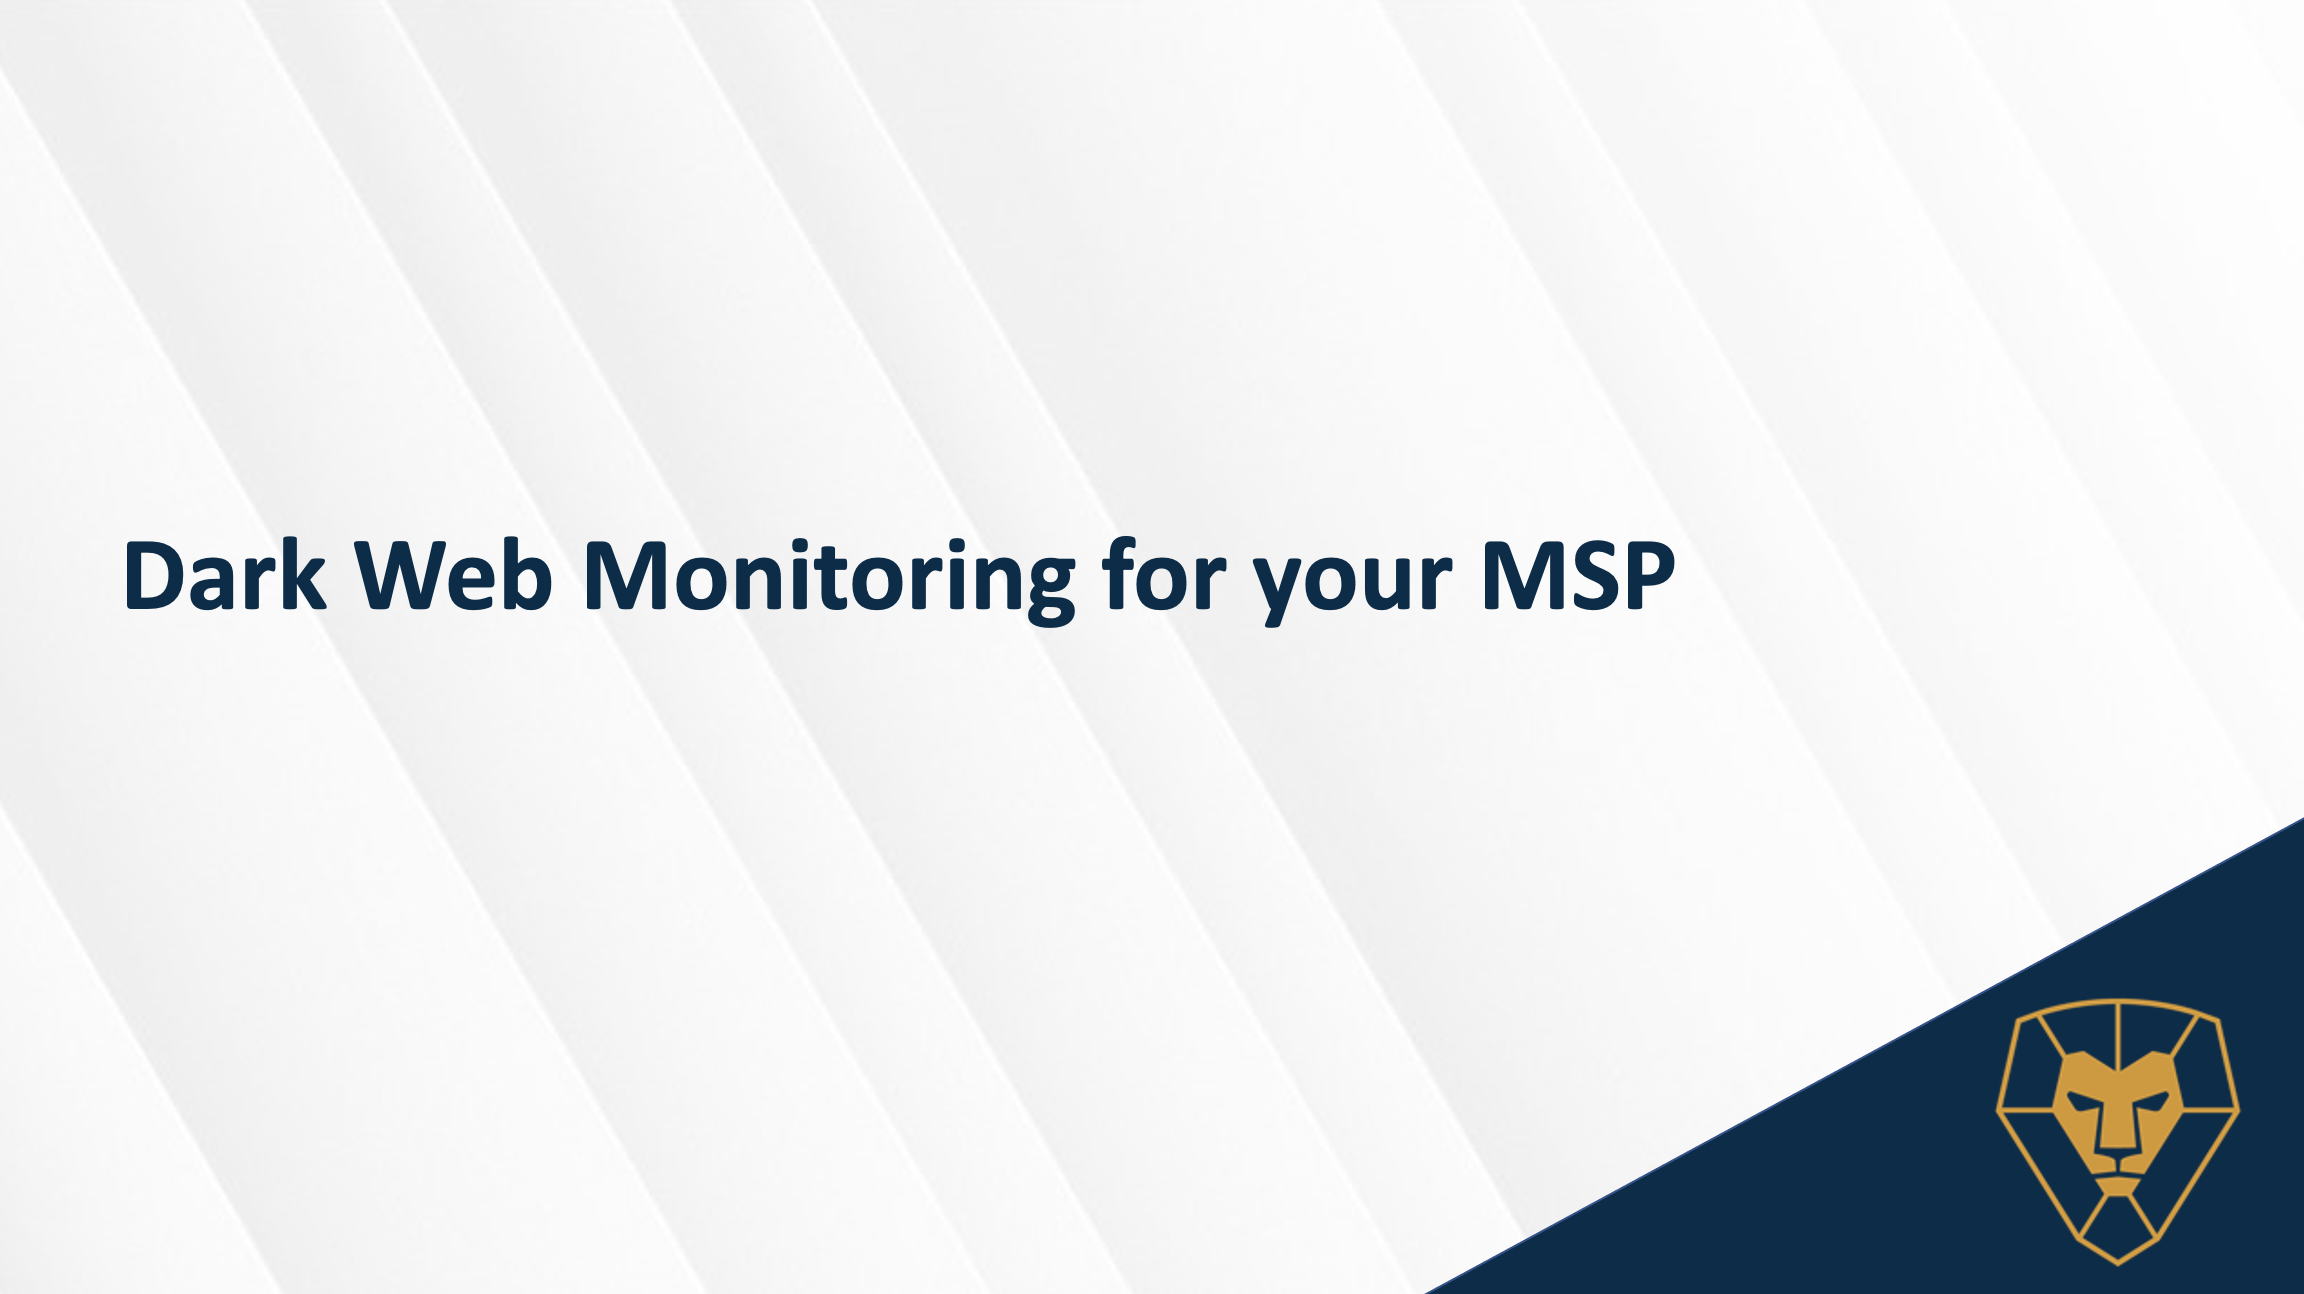 Dark Web Monitoring for your MSP